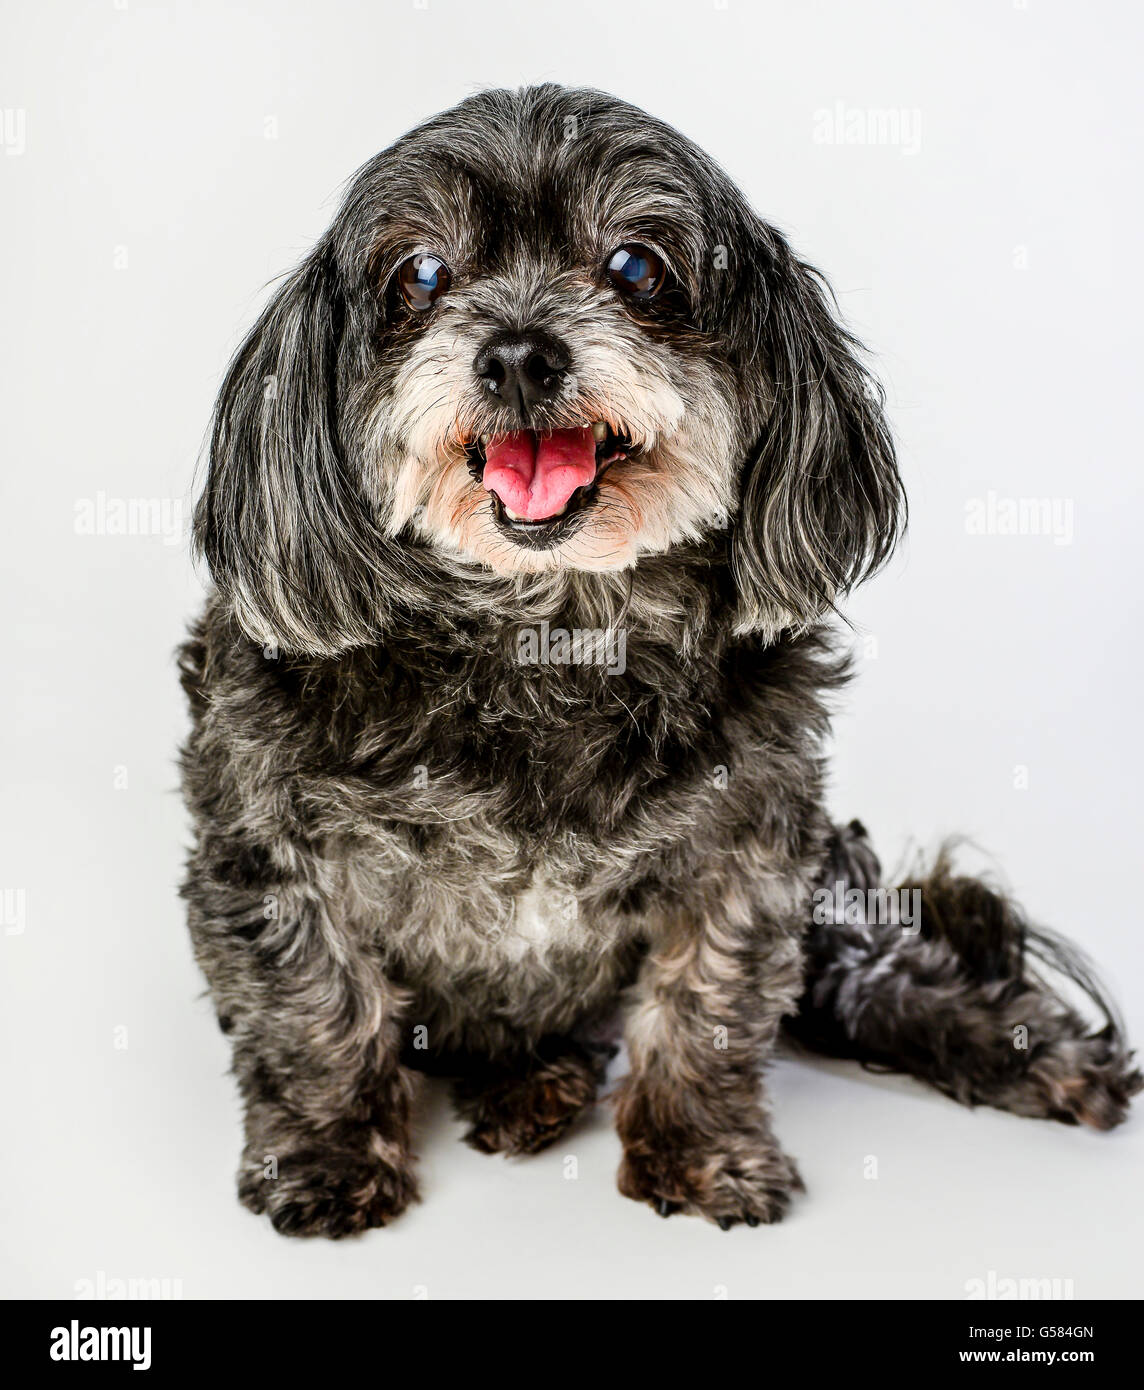 An adorable dark tri-colored mixed breed small dog with tongue out posing and smiling on white background Stock Photo